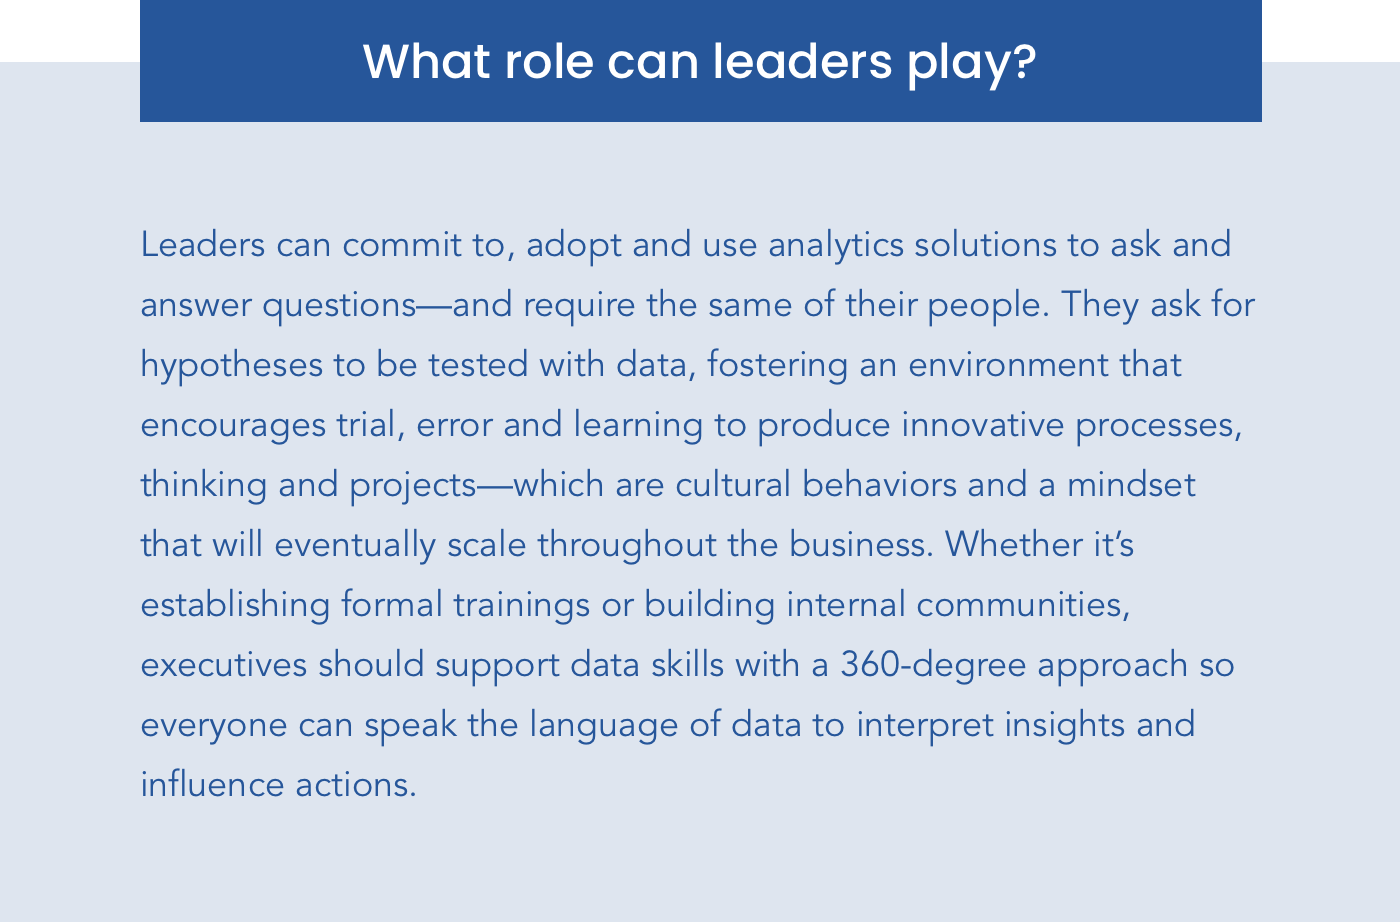 Tableau: What role can leaders play